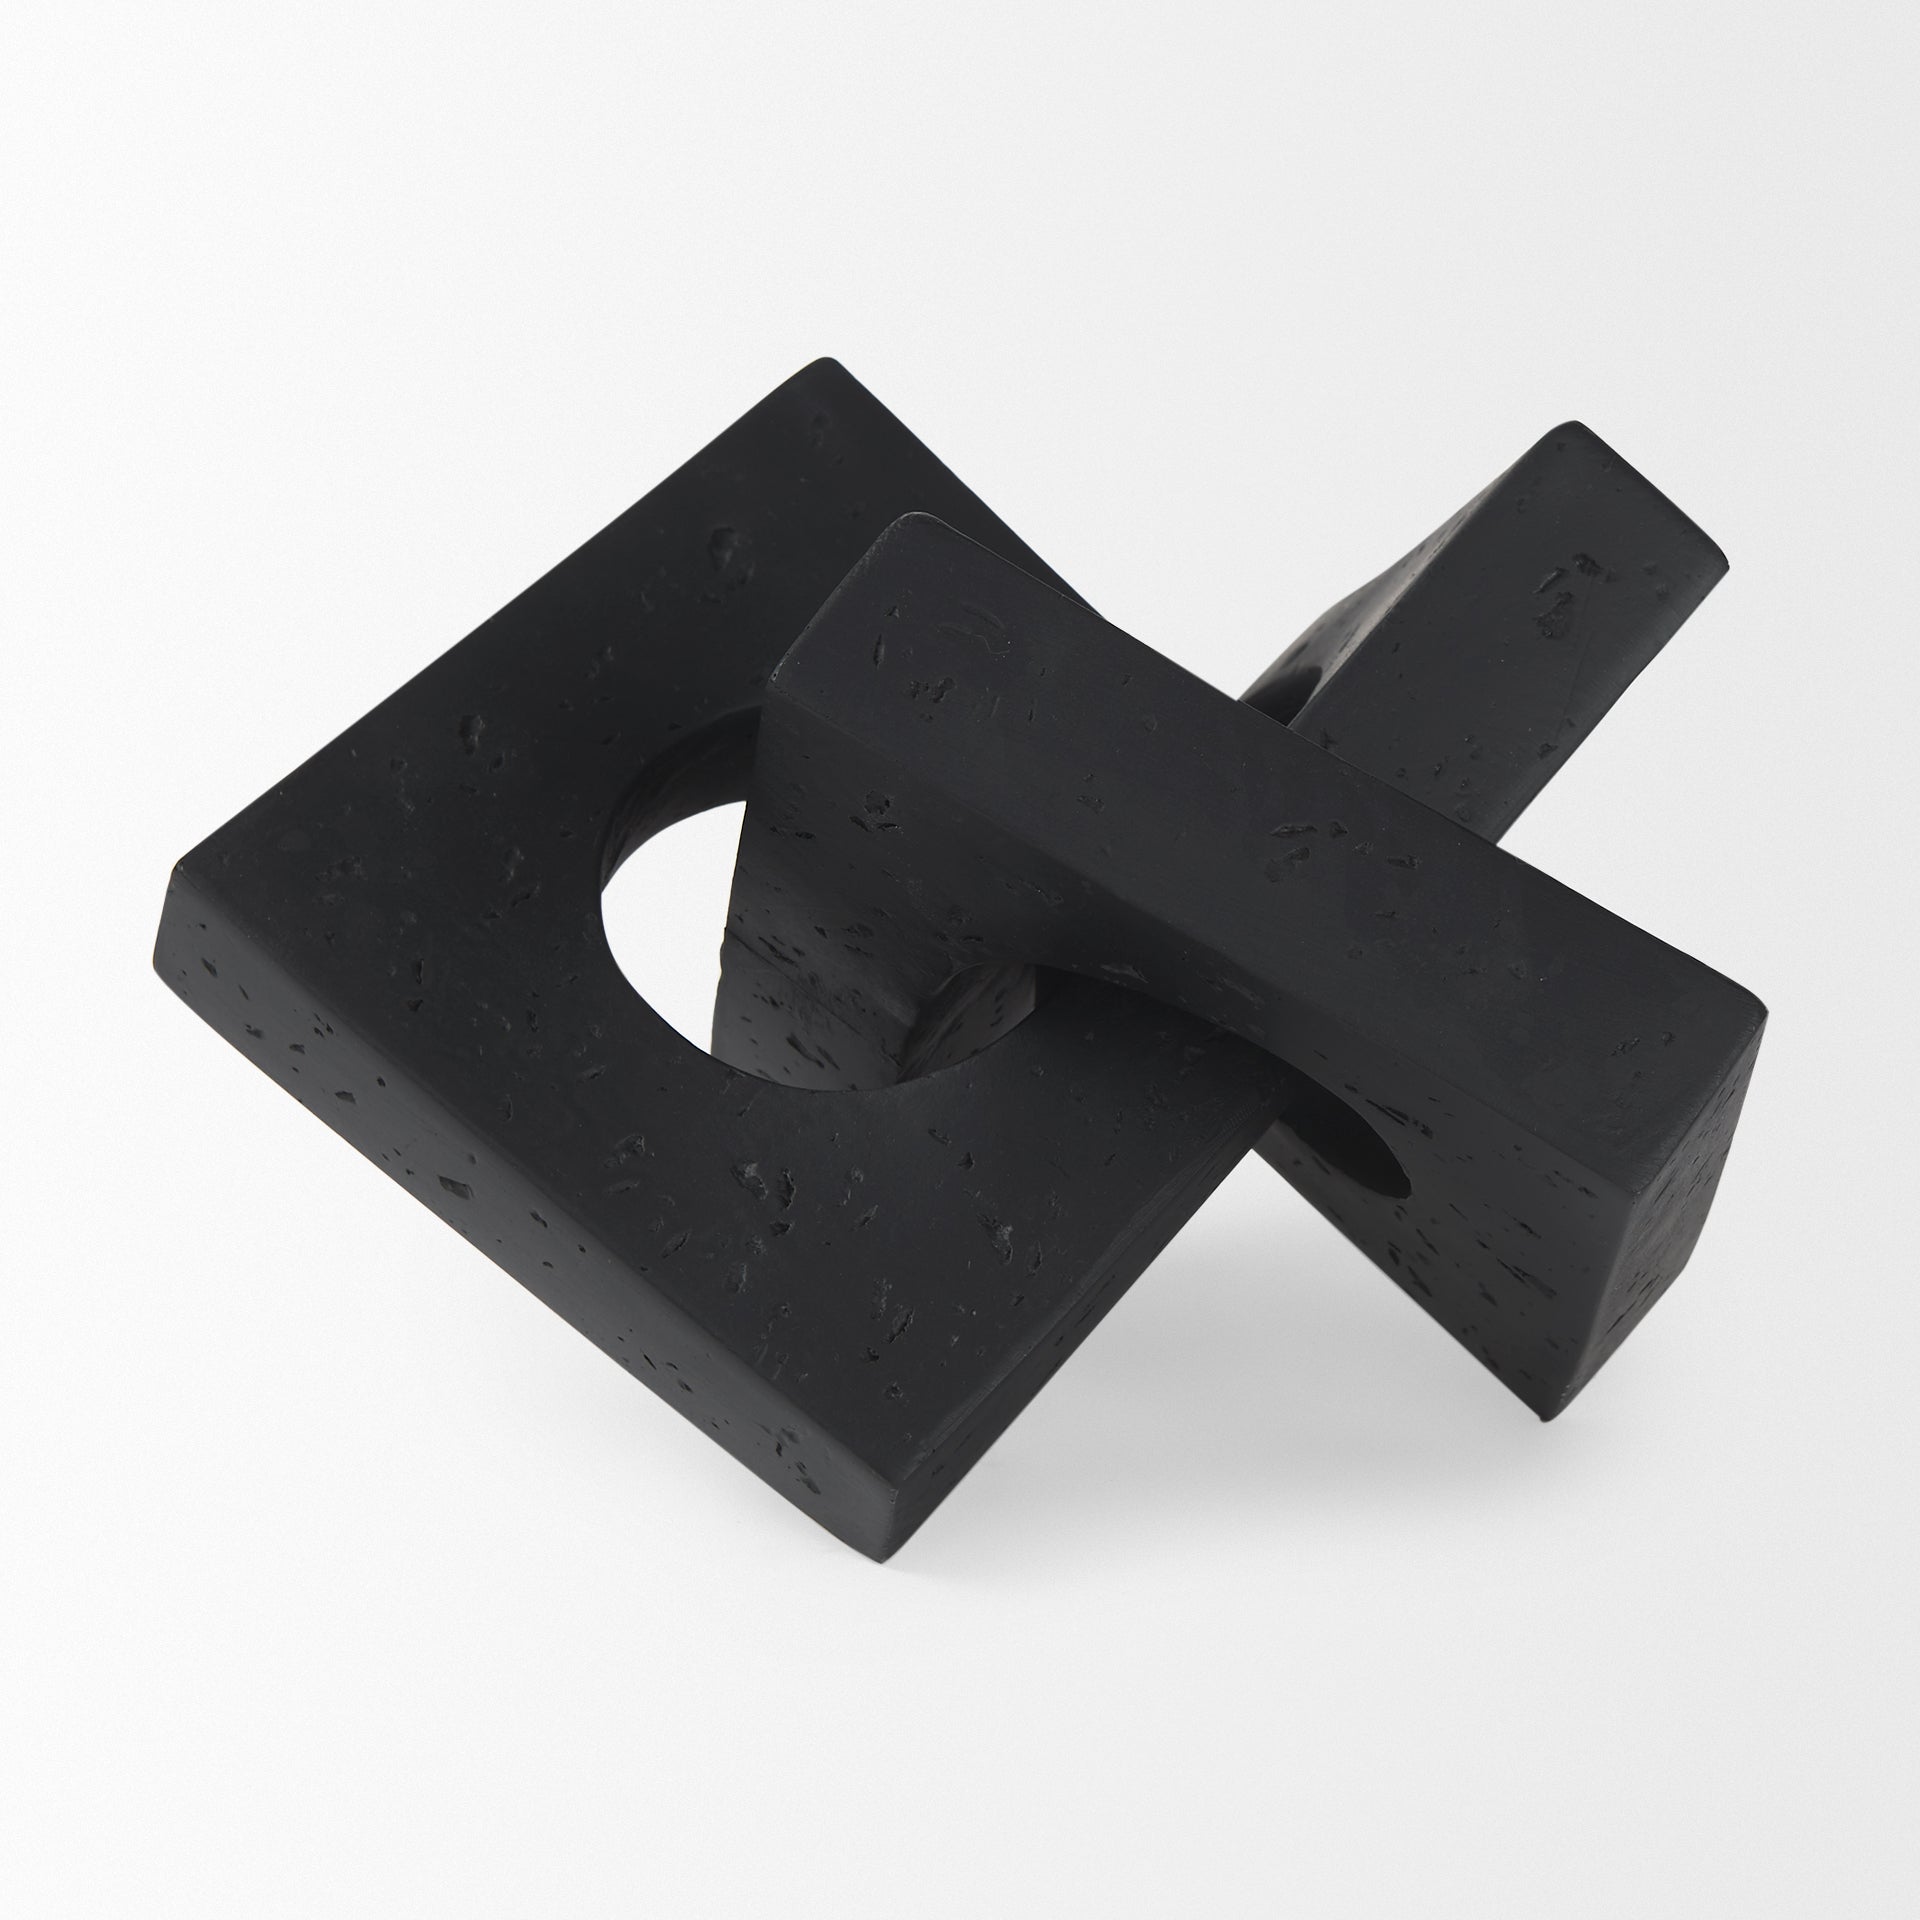 LINX SMALL OBJECT- BLACK RESIN